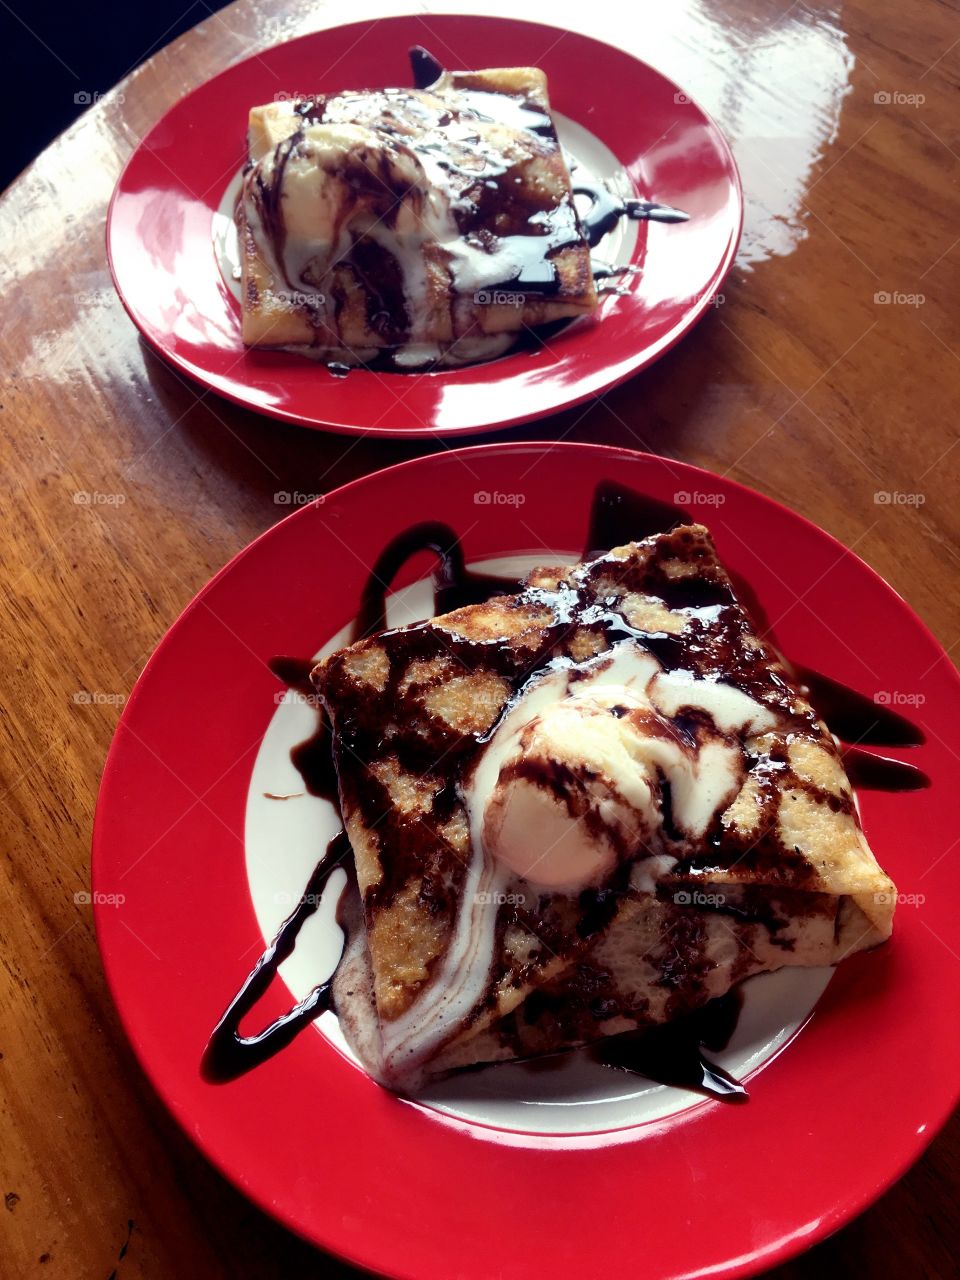 Crepes with a friend